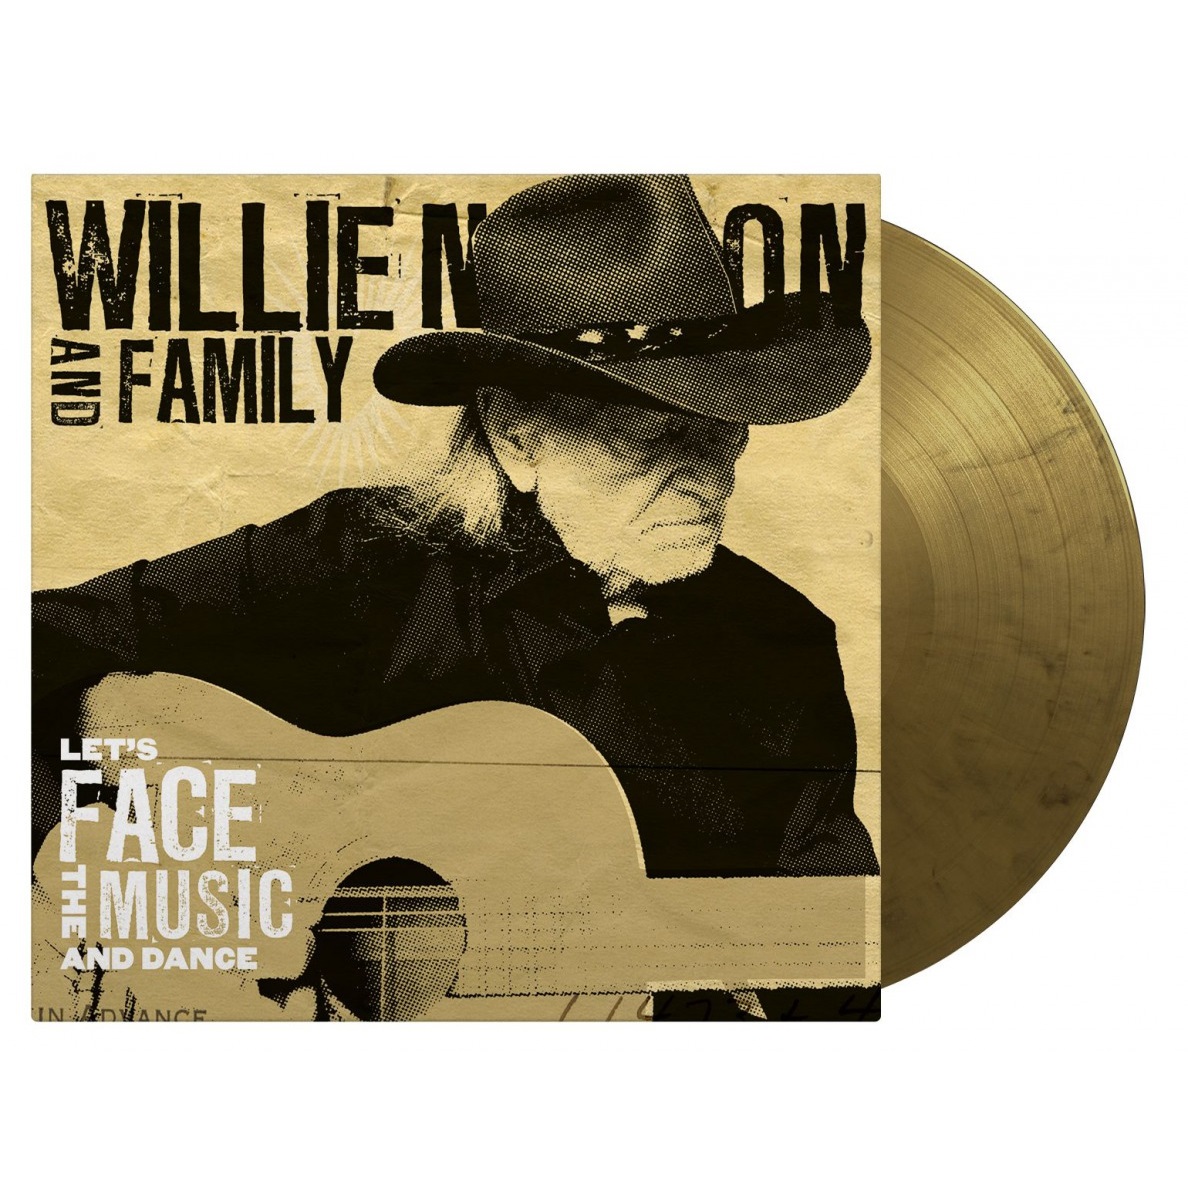 Willie Nelson & Family (윌리 넬슨 앤 패밀리) - Let's Face The Music And Dance [블랙 & 골드 마블 컬러 LP] 